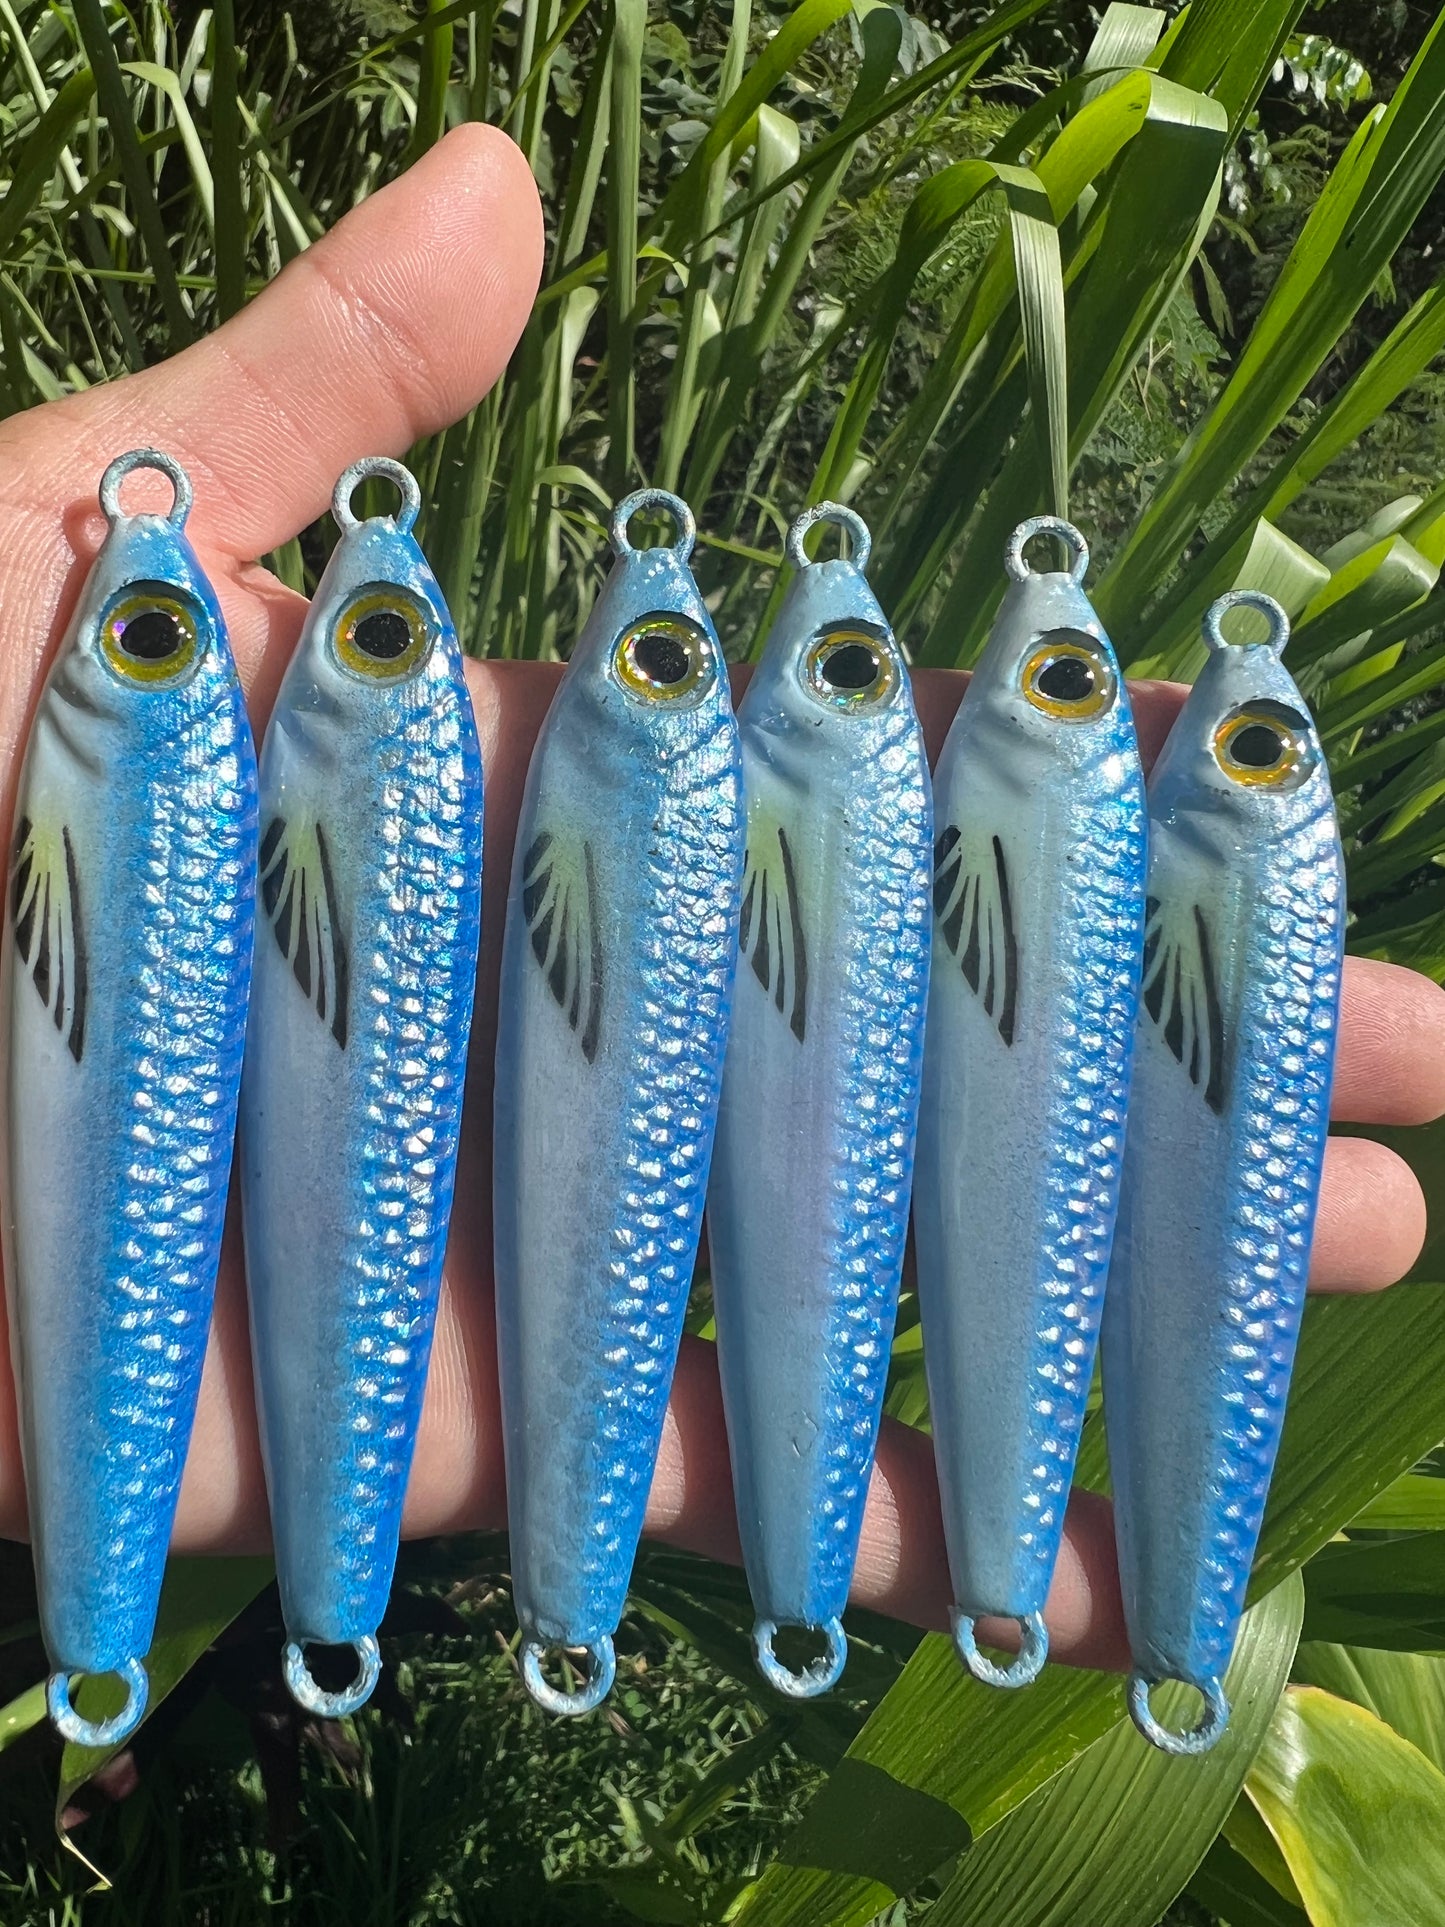 4oz Silver Scale Jig. Comes with Assist Hooks and hardware.